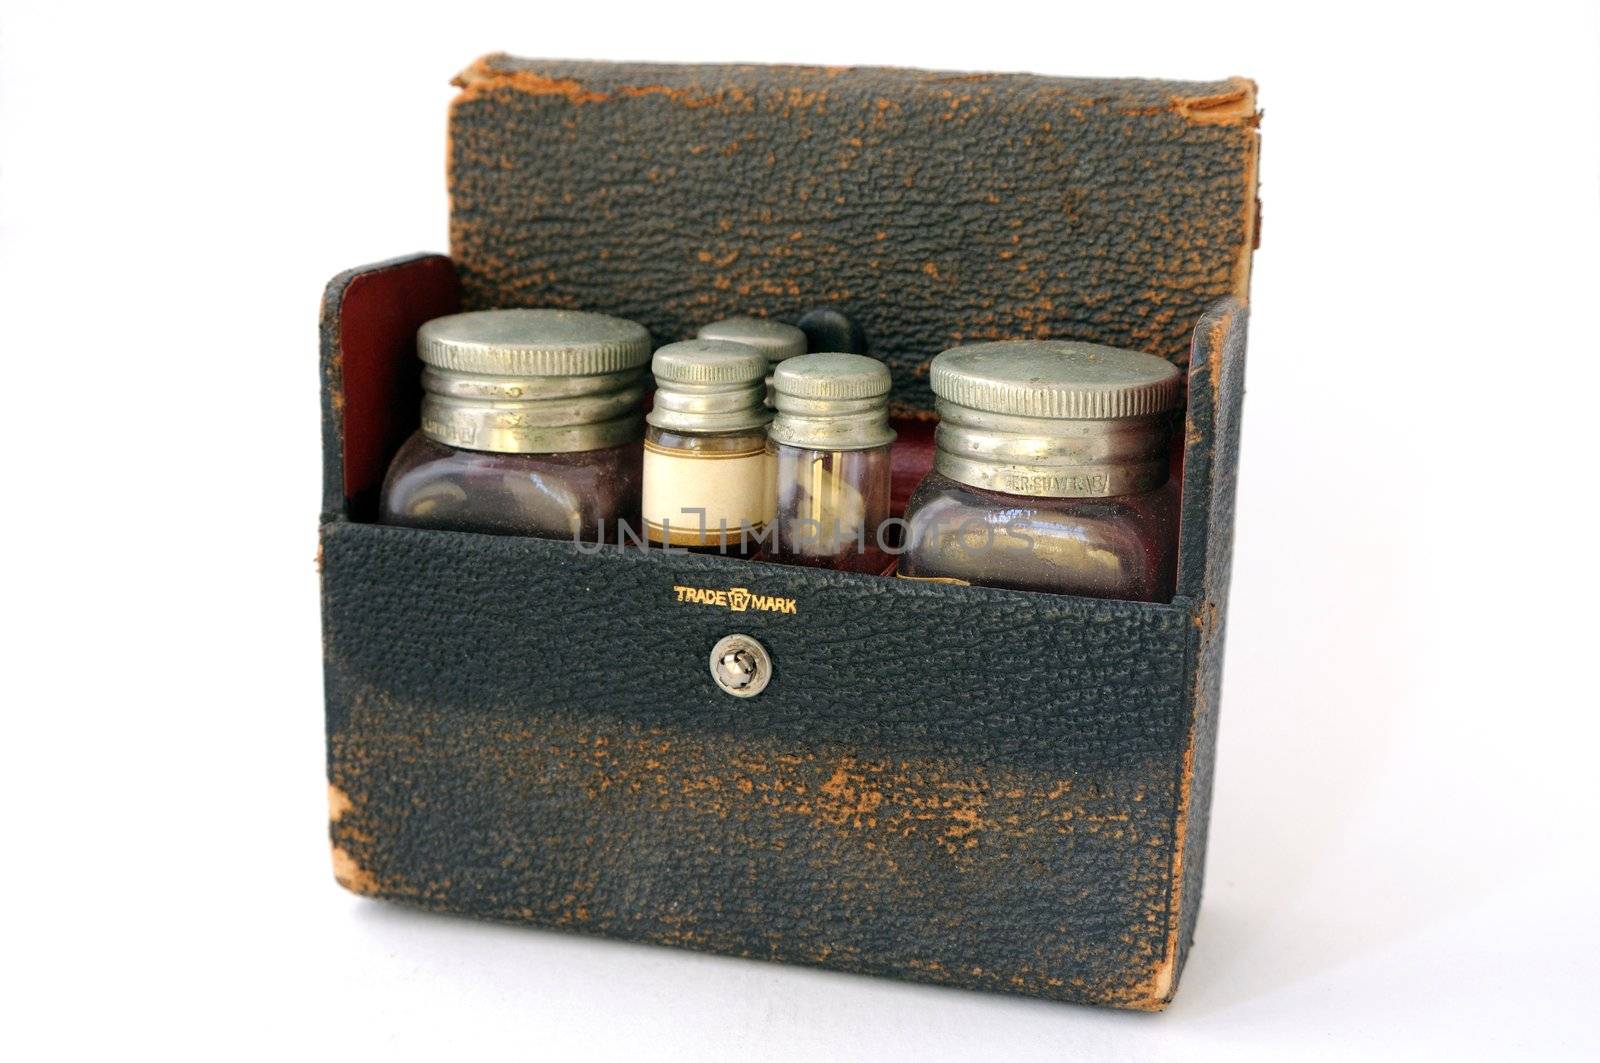 A vintage, distressed leather pharmaceutical case with a red lining, filled with two large bottles and three small vials.  One of the vials has a blank label facing forwards.